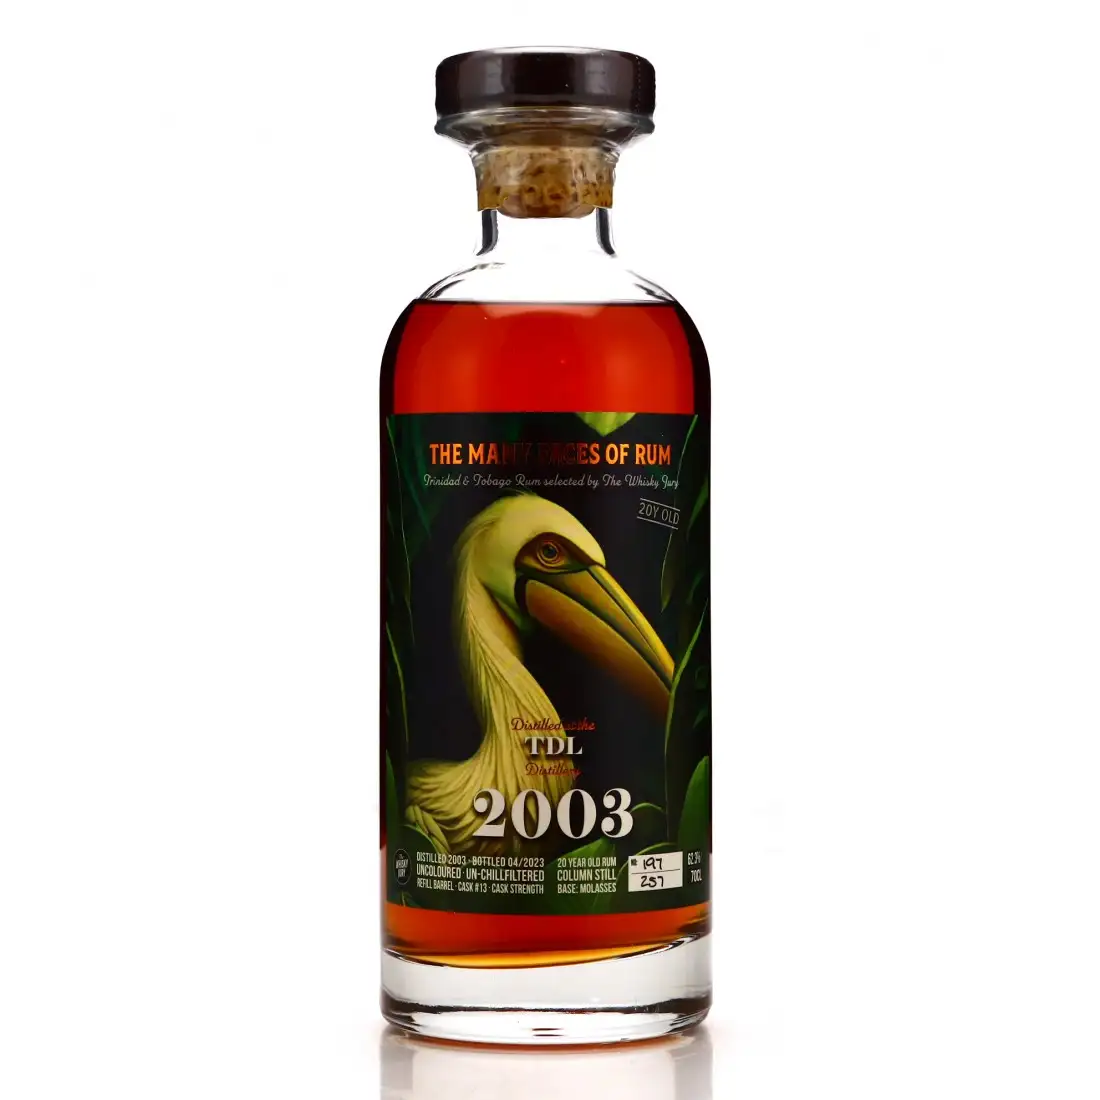 Image of the front of the bottle of the rum Trinidad Rum